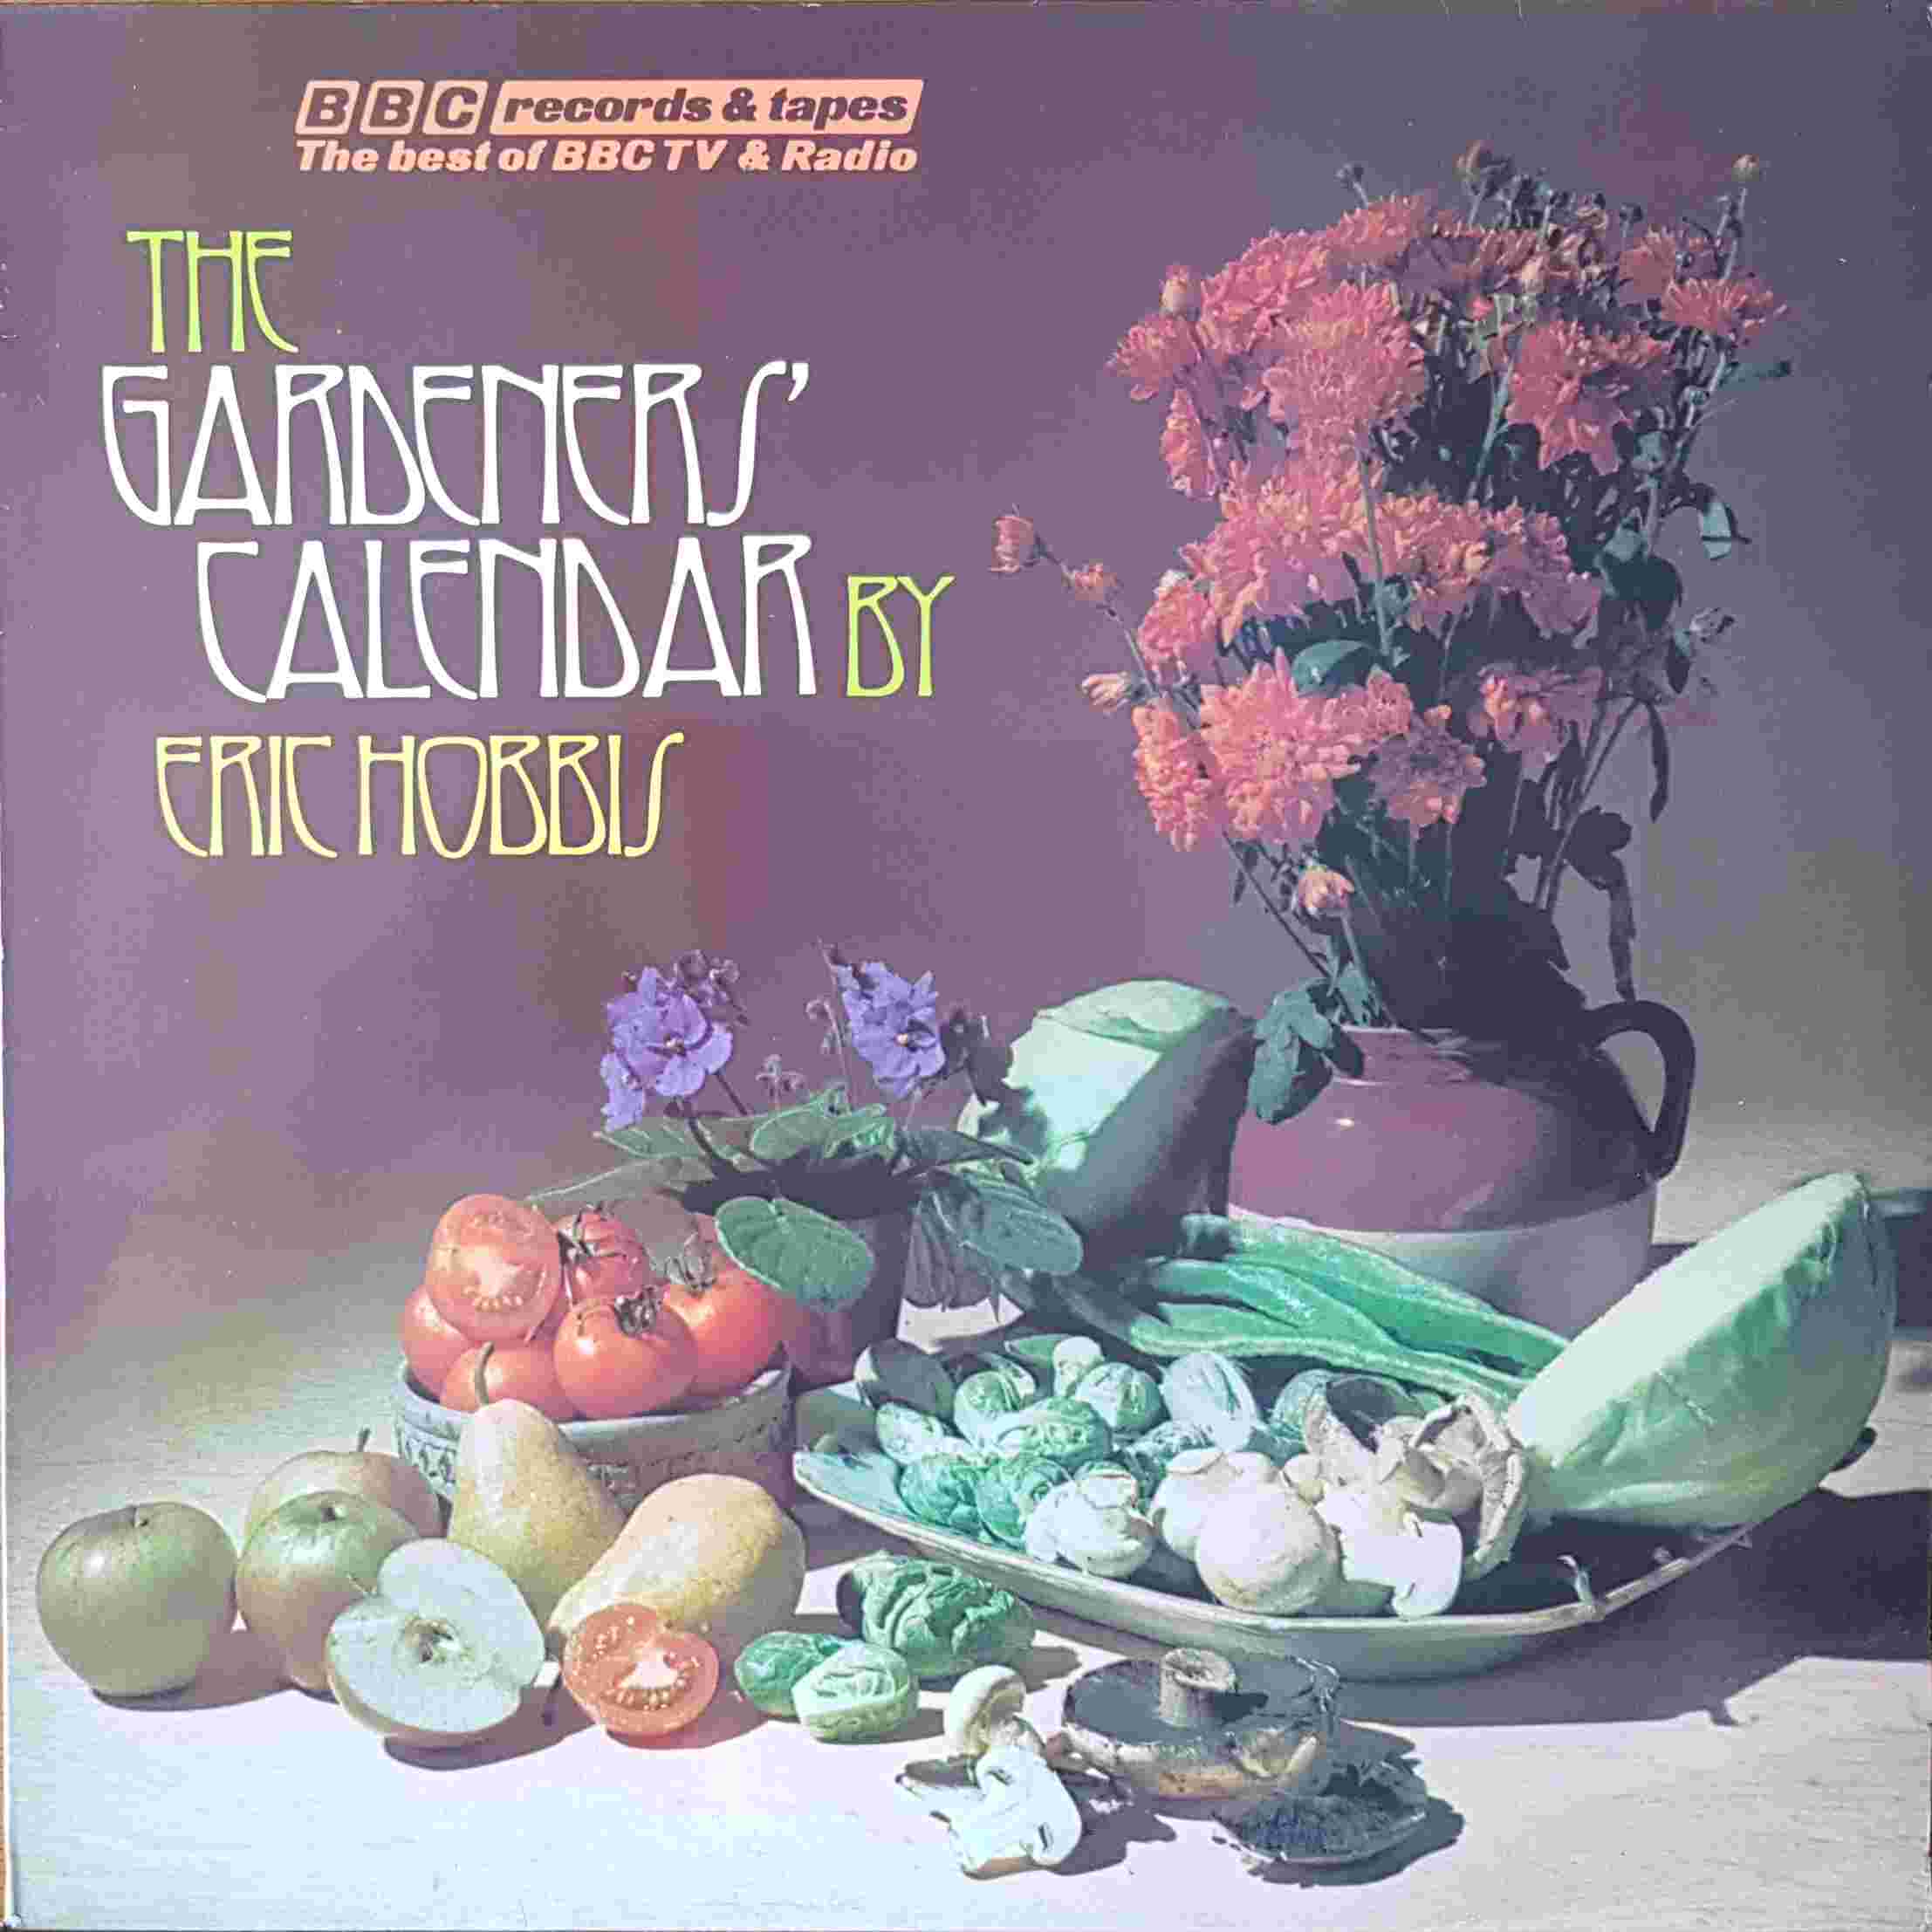 Picture of REC 192 The gardeners' calendar by artist Eric Hobbs from the BBC albums - Records and Tapes library